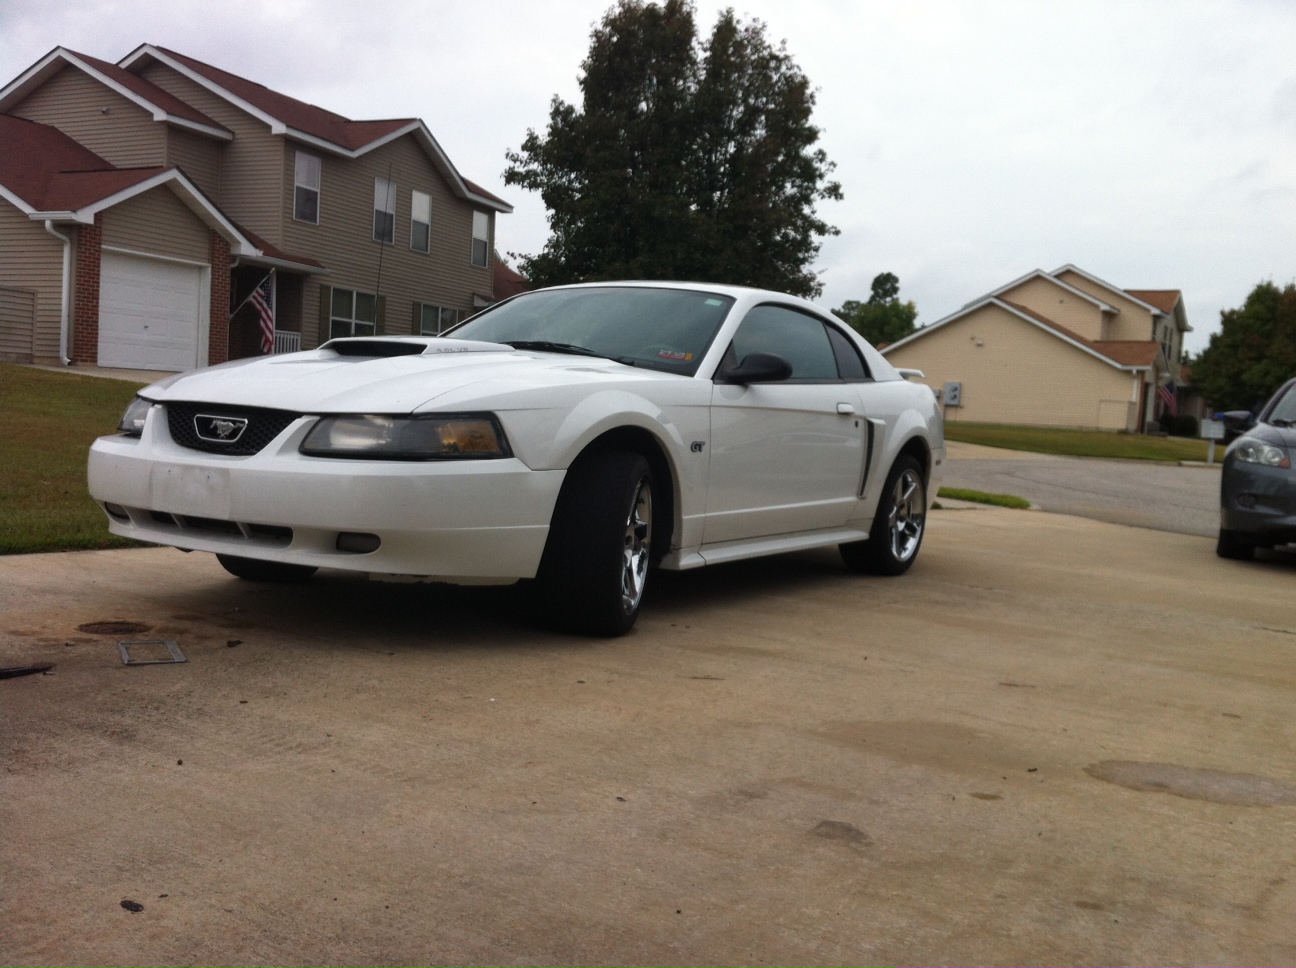 2002 Ford mustang gt deluxe review #10